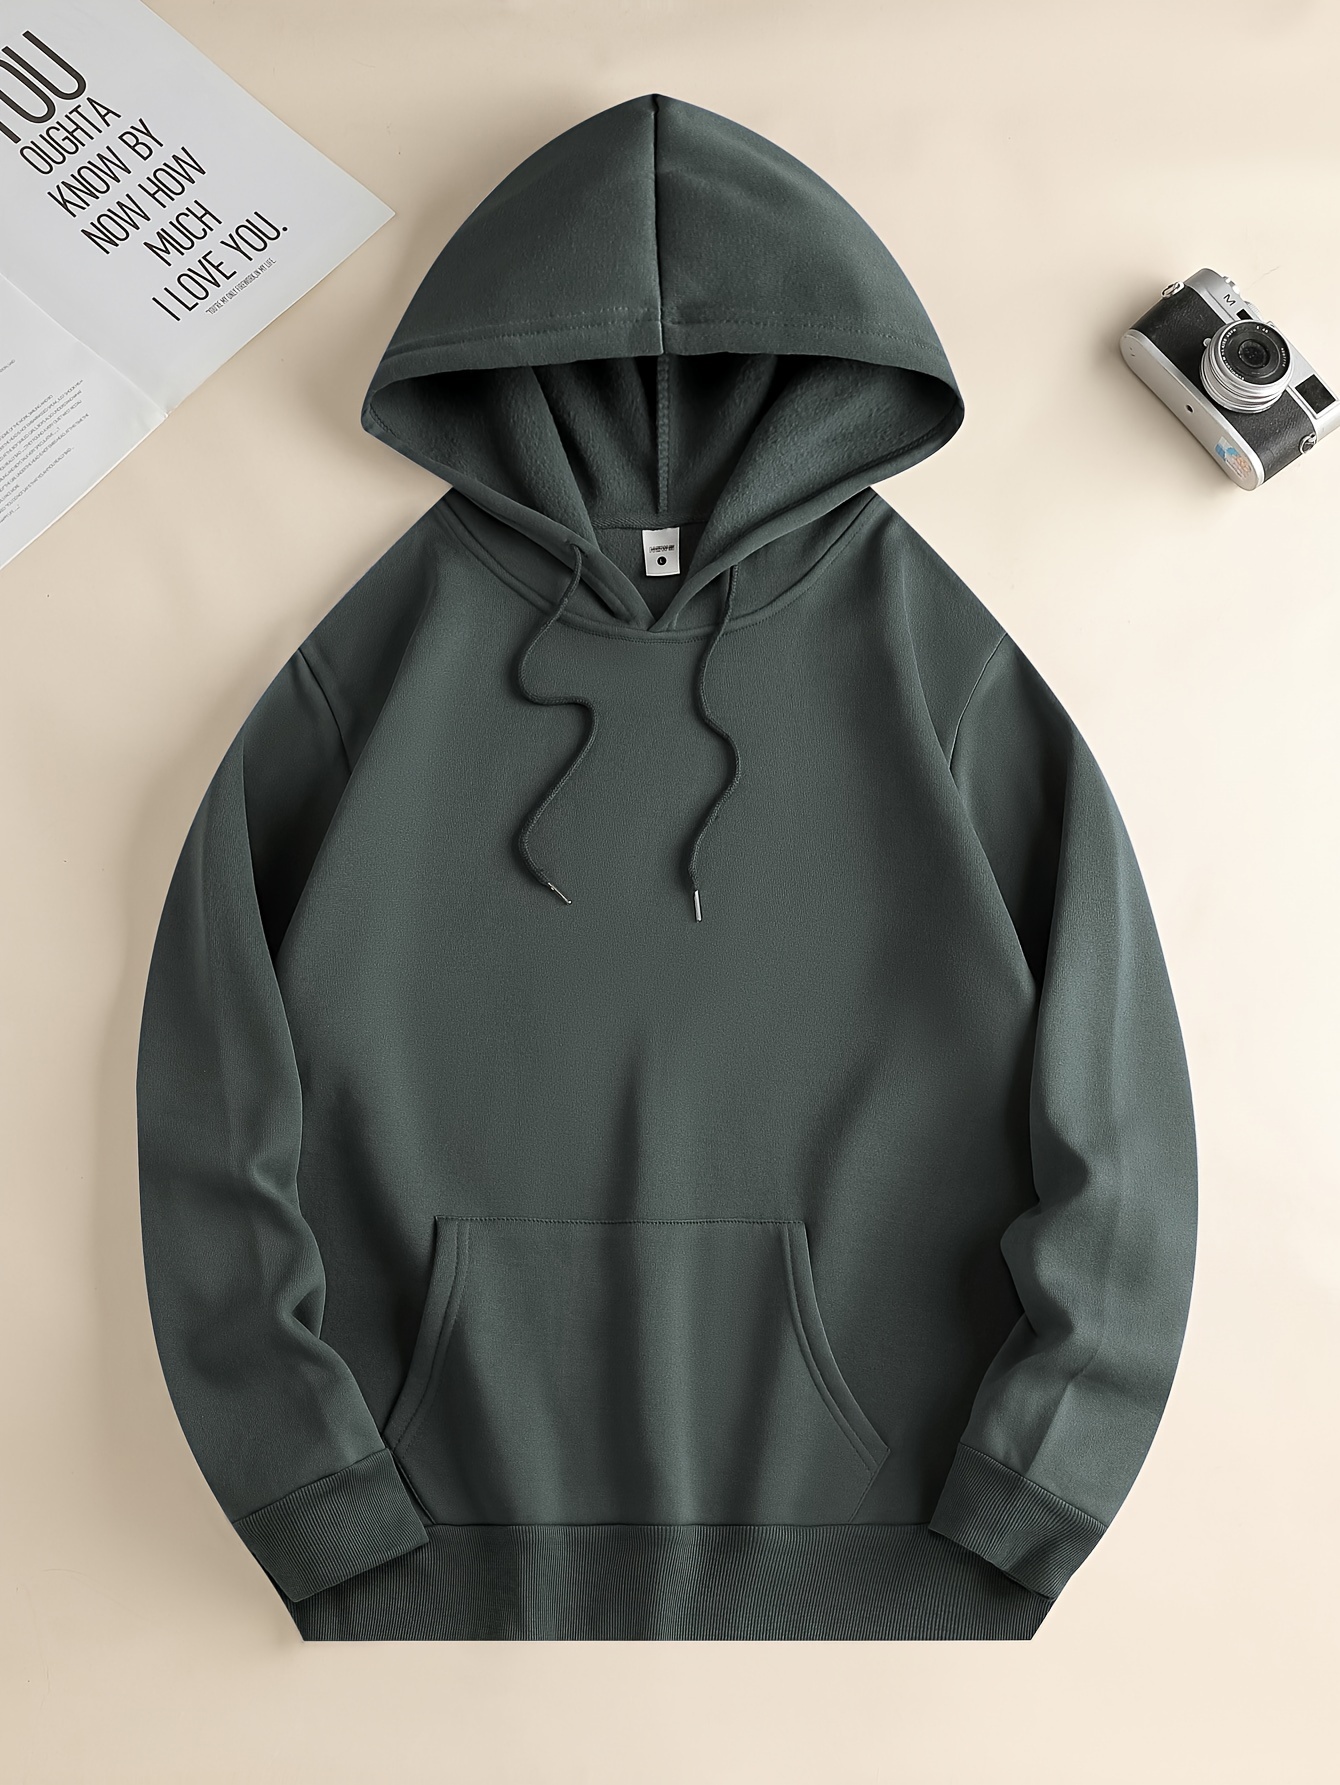 solid color hoodies for men hoodie with kangaroo pocket comfy loose trendy hooded pullover mens clothing for autumn winter details 0